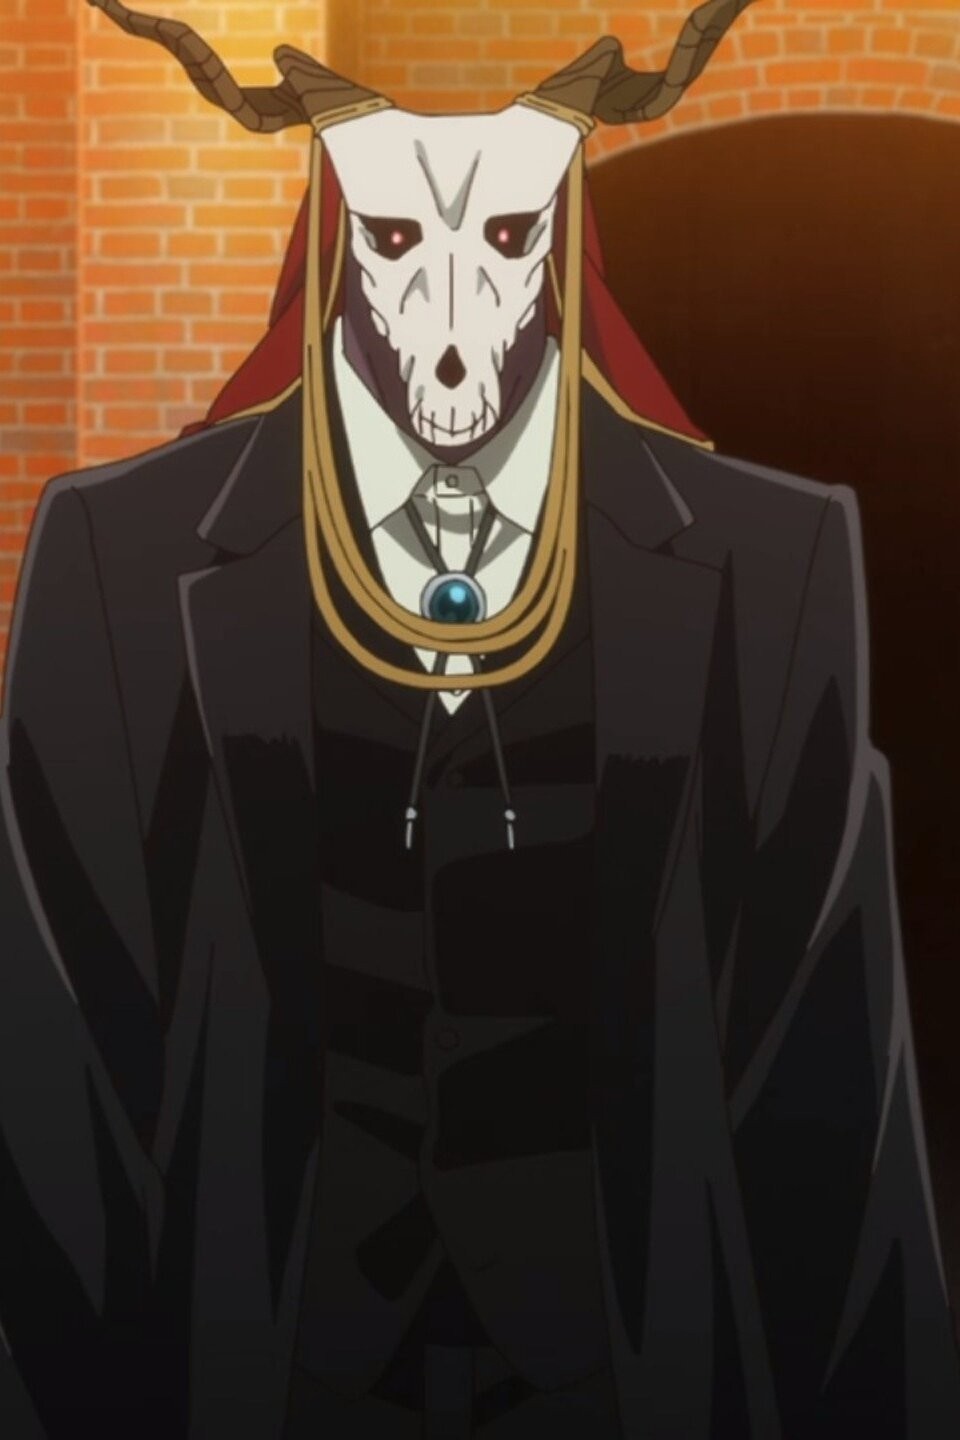 The Ancient Magus' Bride - Rotten Tomatoes